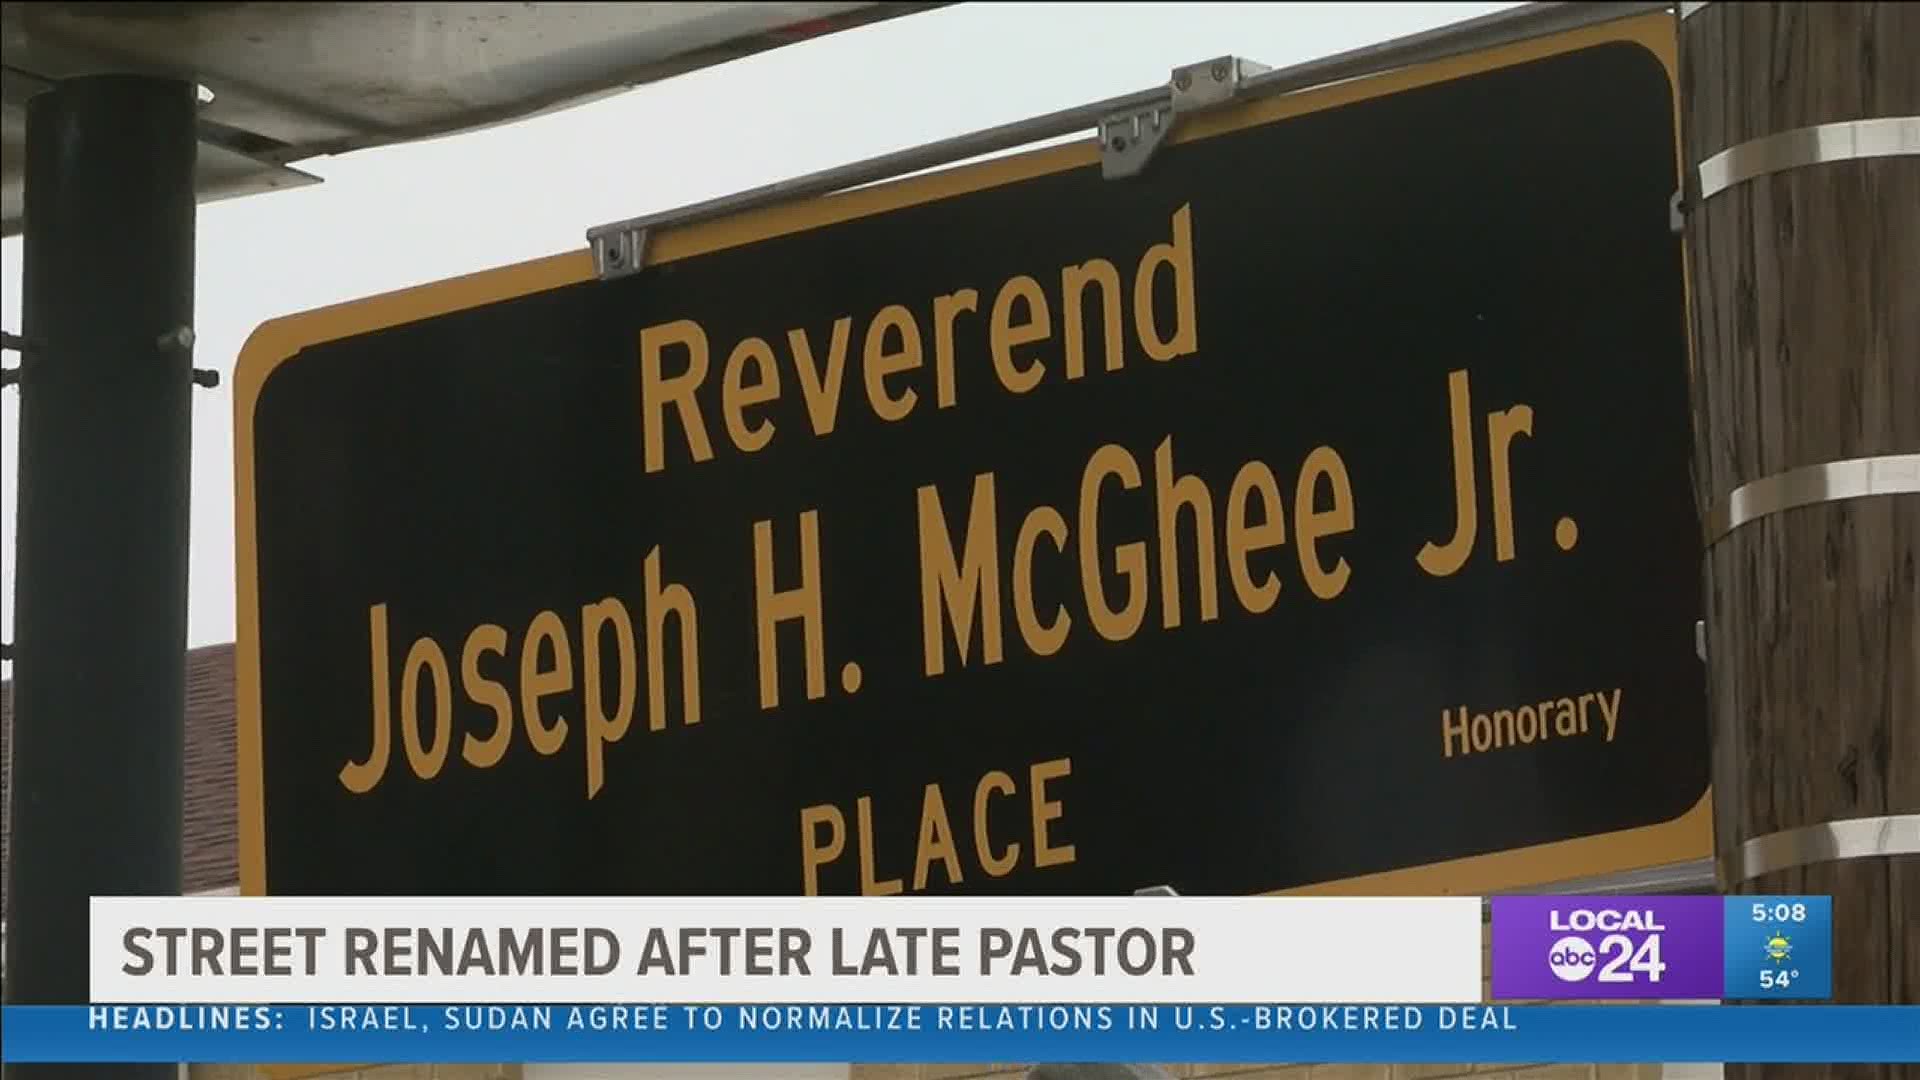 South Memphis church renames street after late pastor